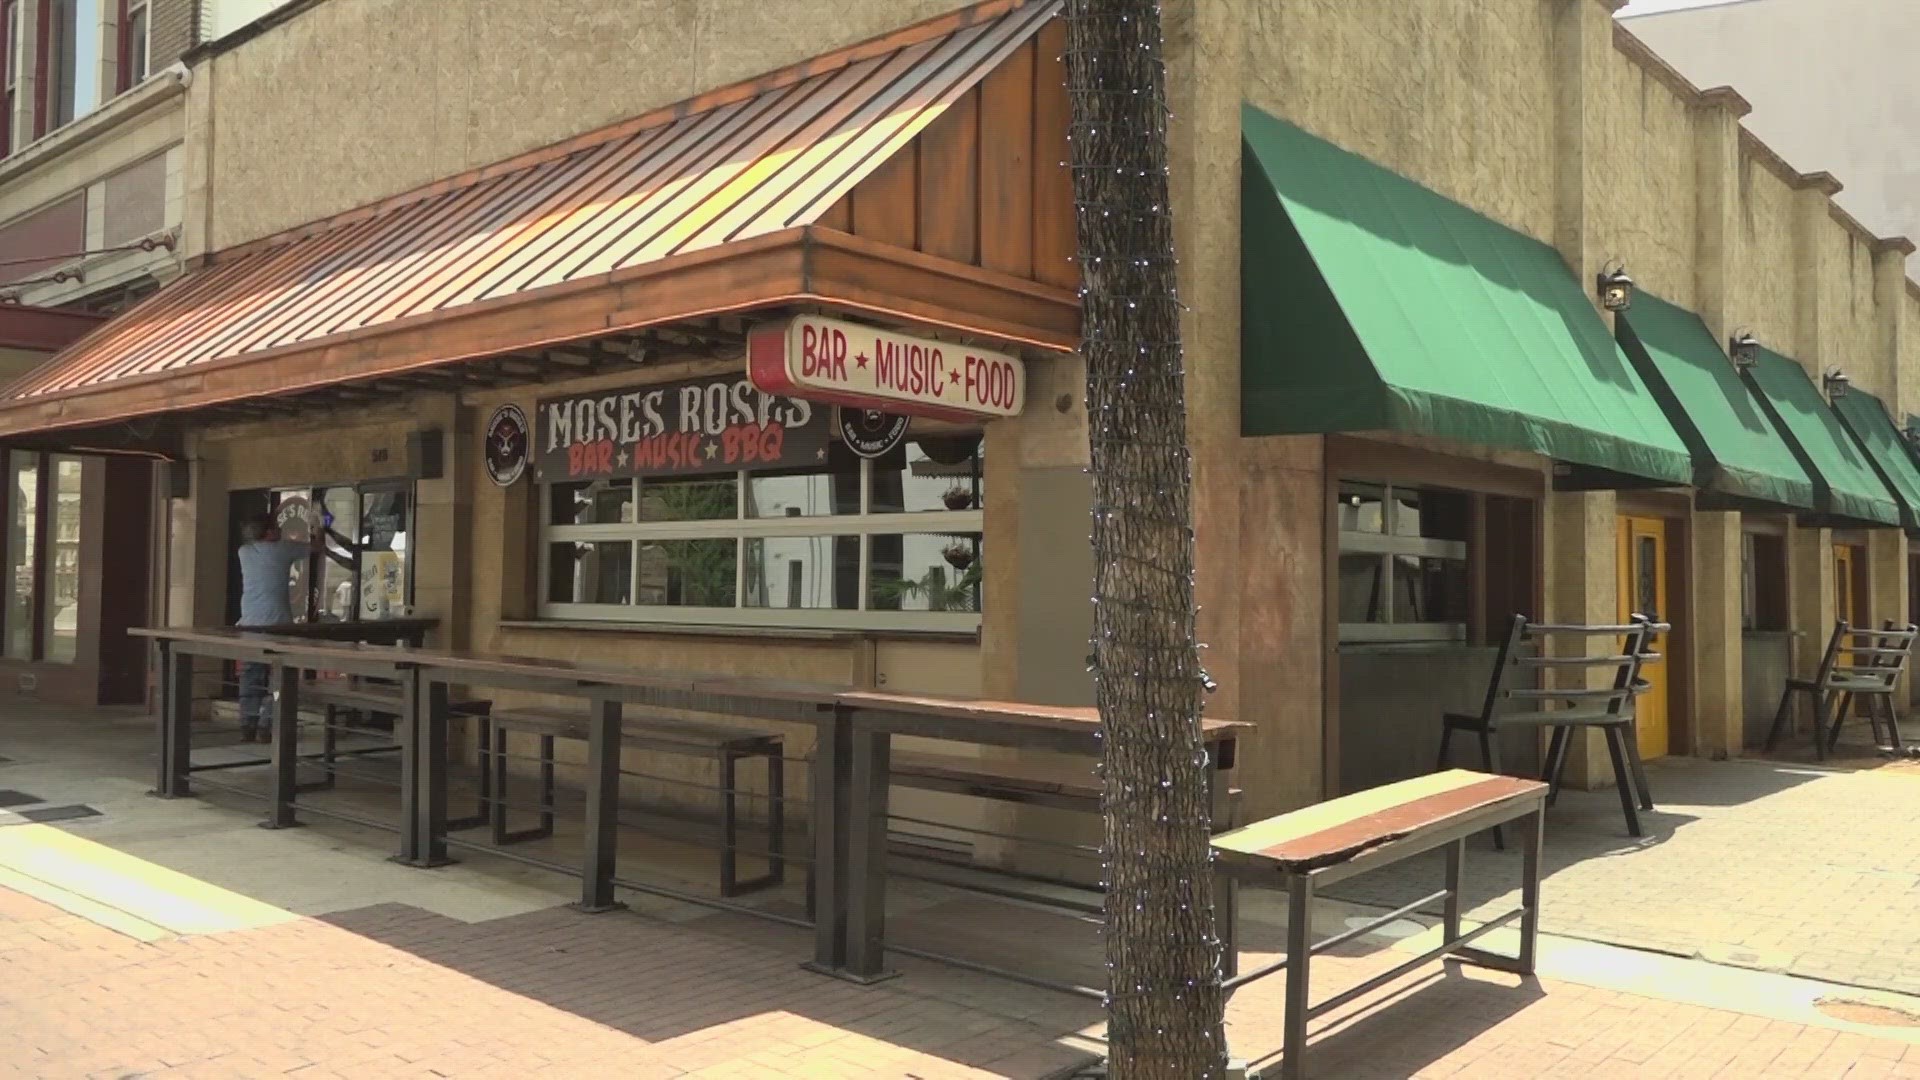 The owners of Moses Rose's Hideout have reached a deal with government agencies to sell their property, ending an eminent domain case to expand Alamo grounds.